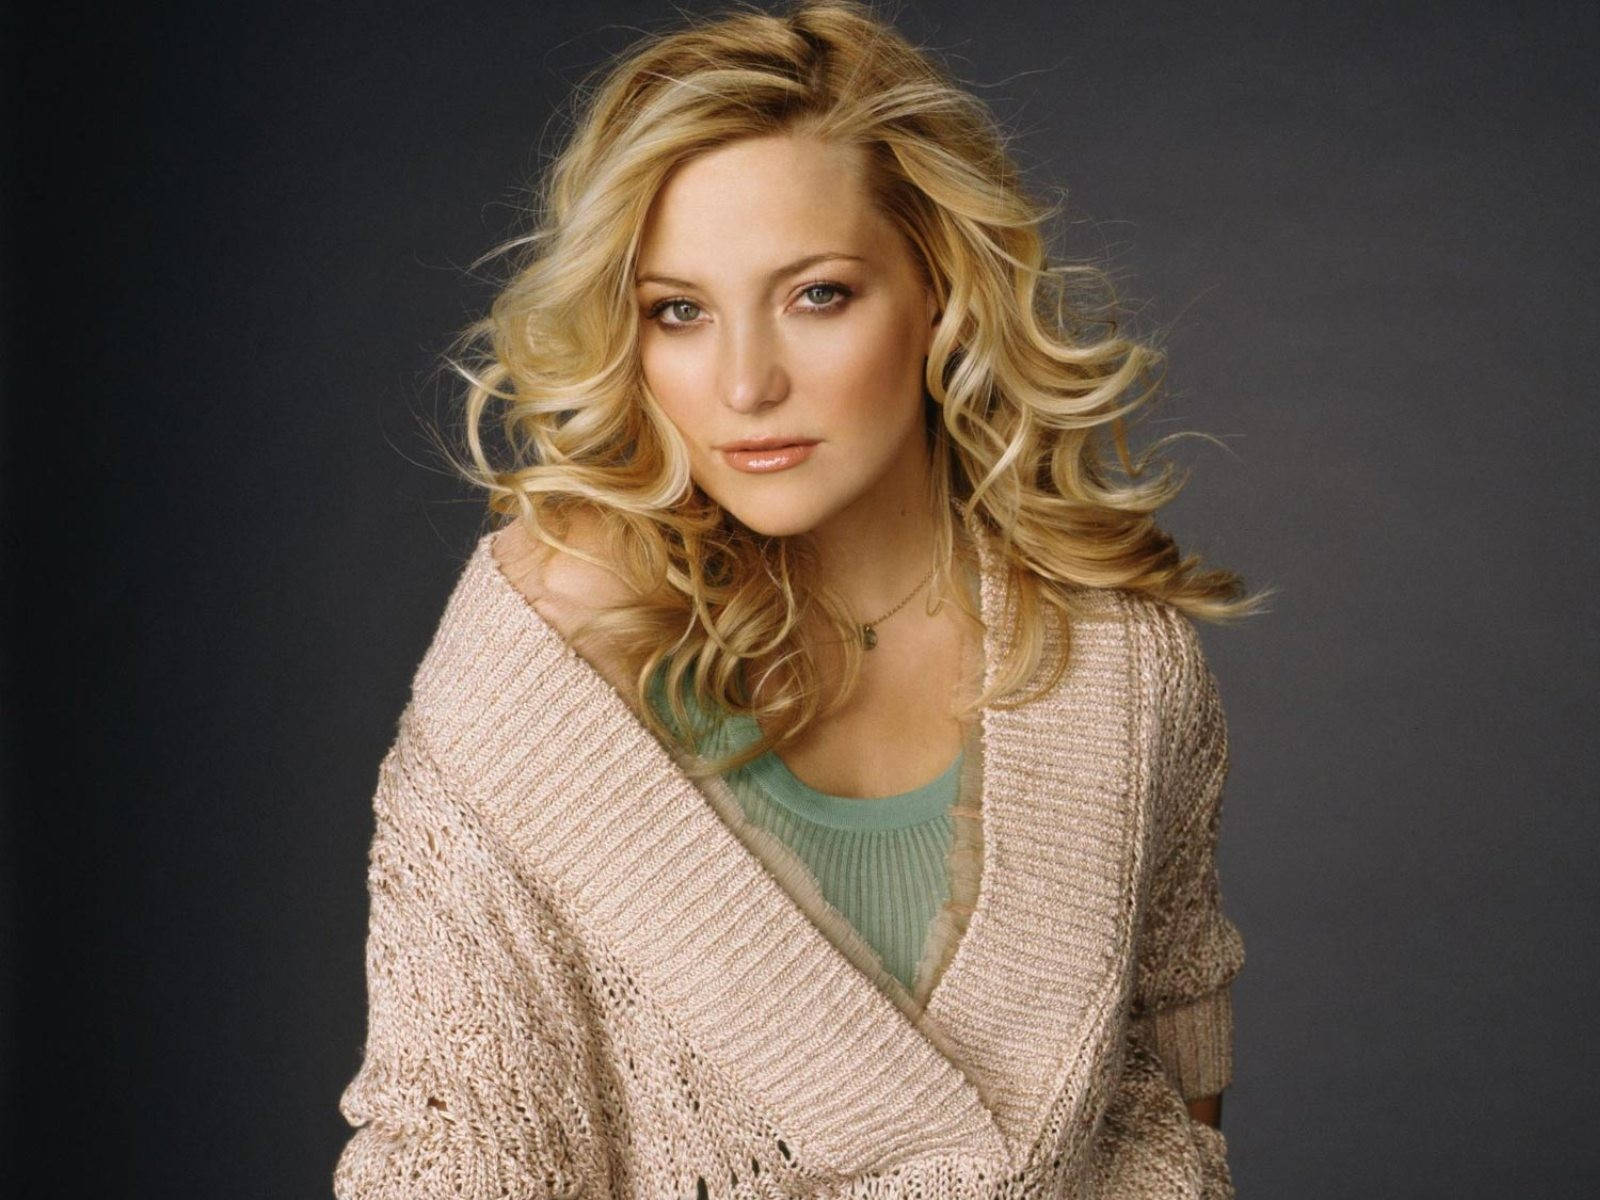 A Captivating Image Of Kate Hudson Wearing Casual Attire While Posing For The Camera.